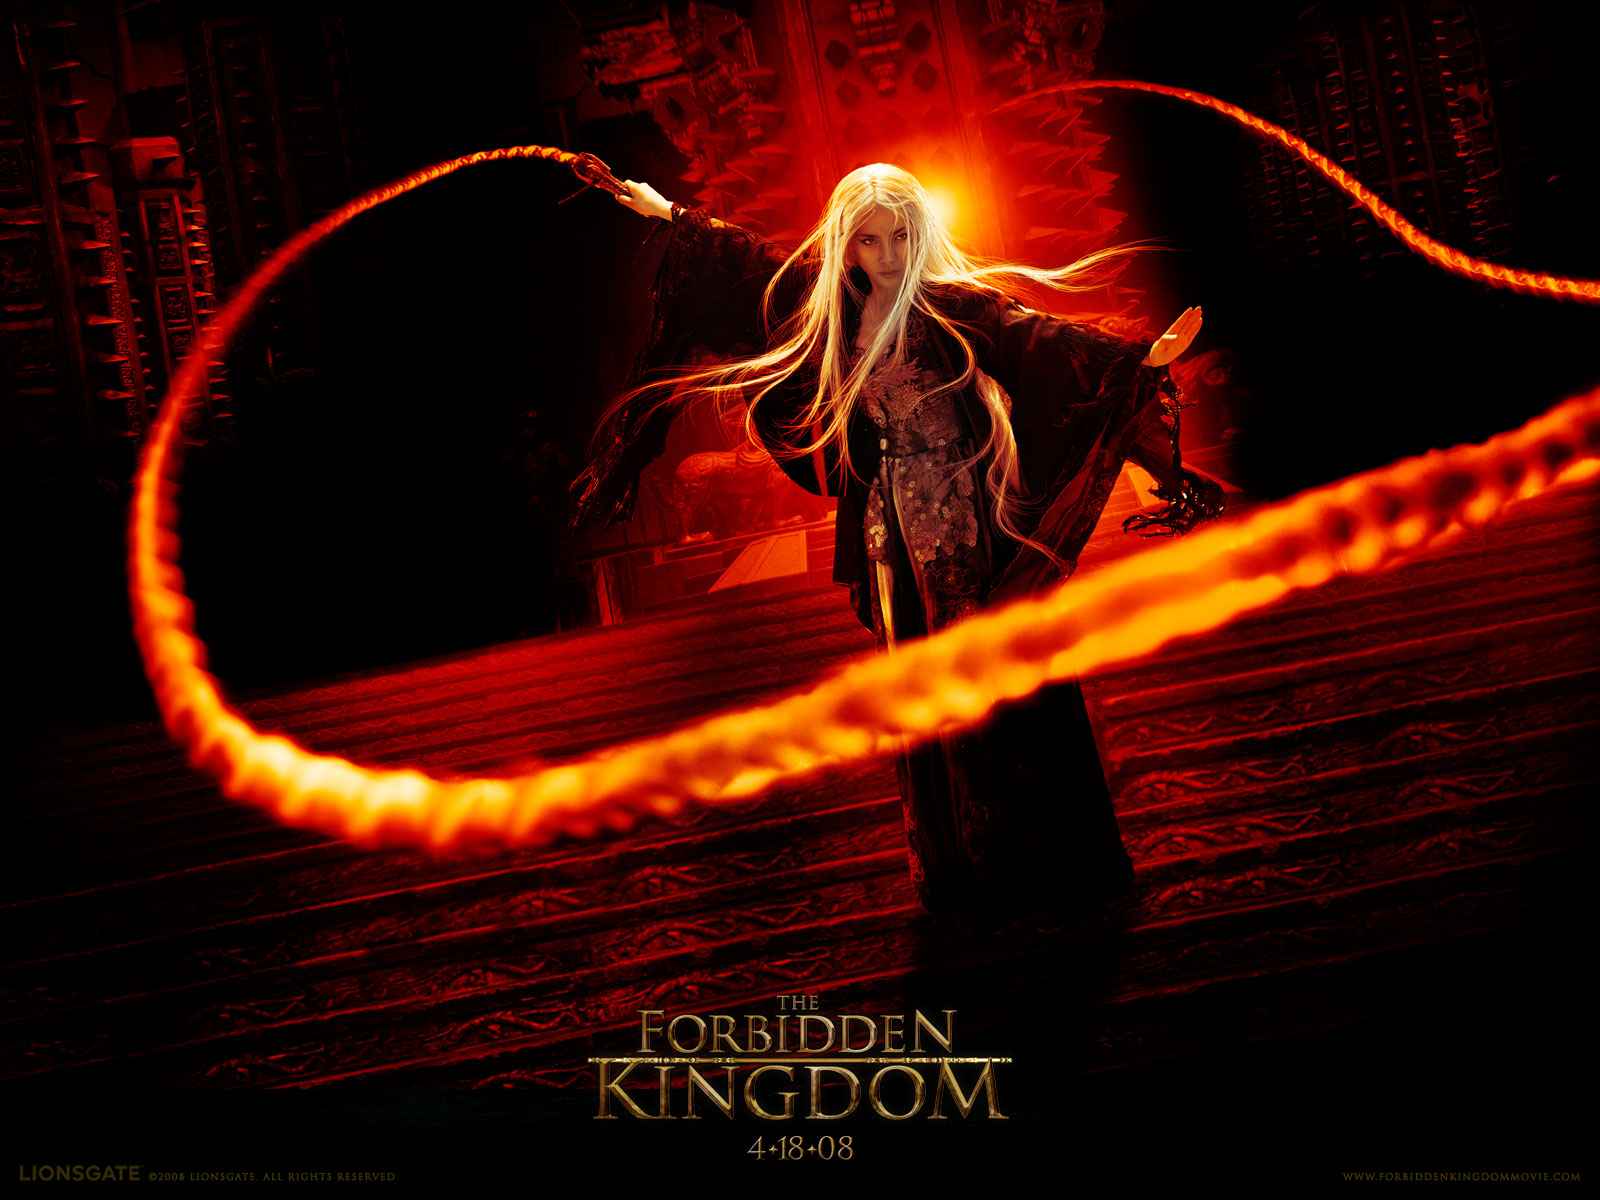 movies, The Forbidden Kingdom, Whips Wallpaper